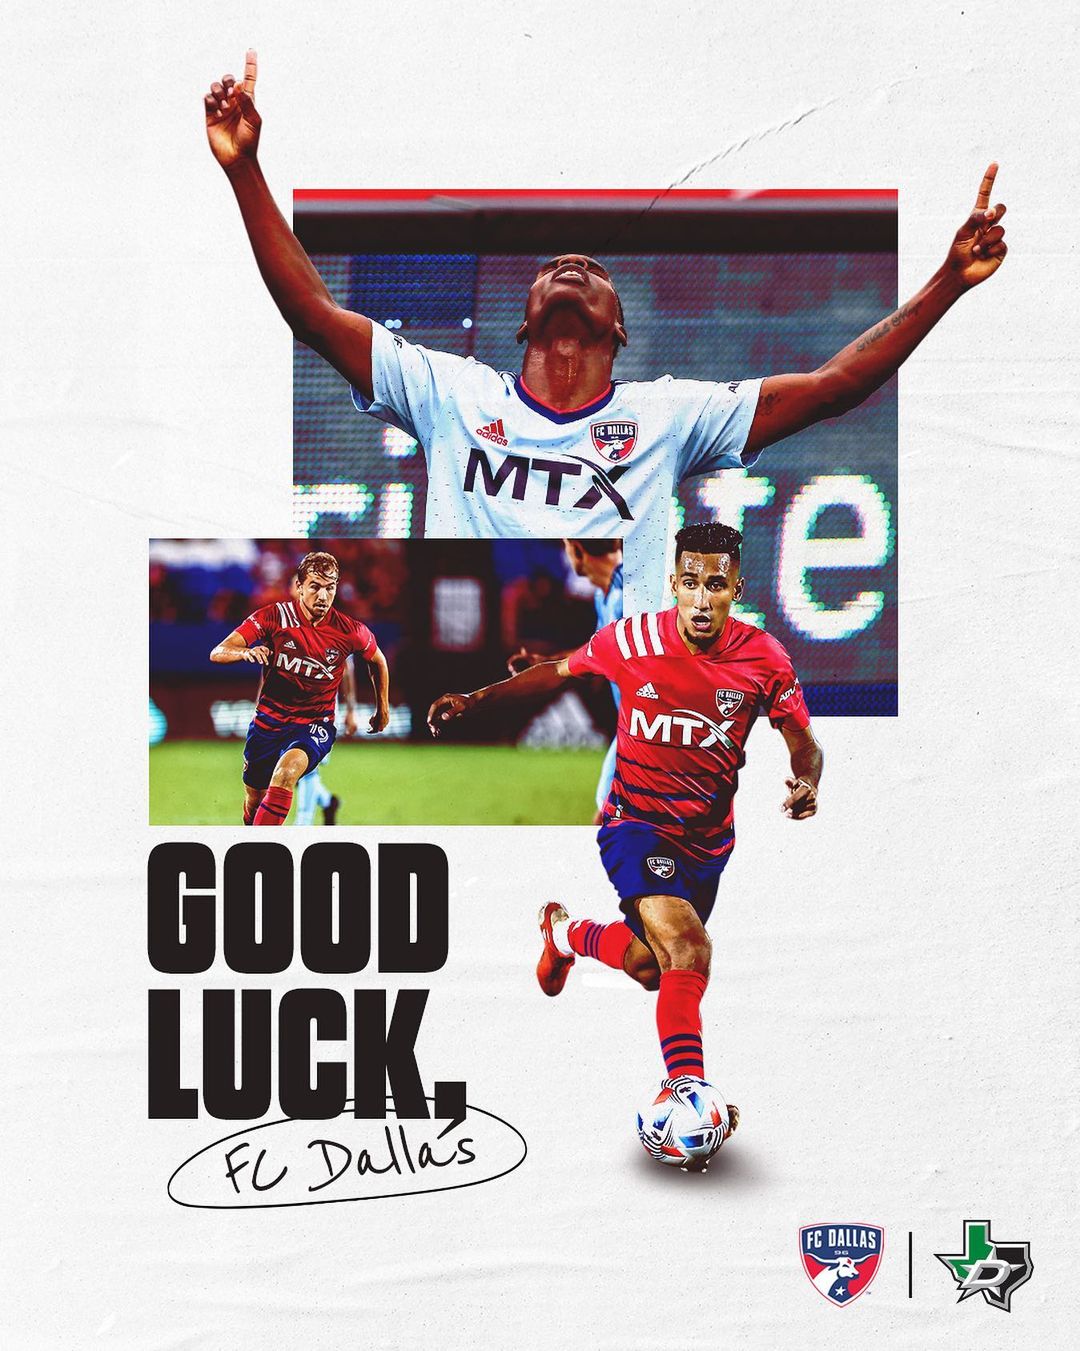 LET’S GO! #DTID  Good luck today and all season long, @FCDallas  #MLSisBack...